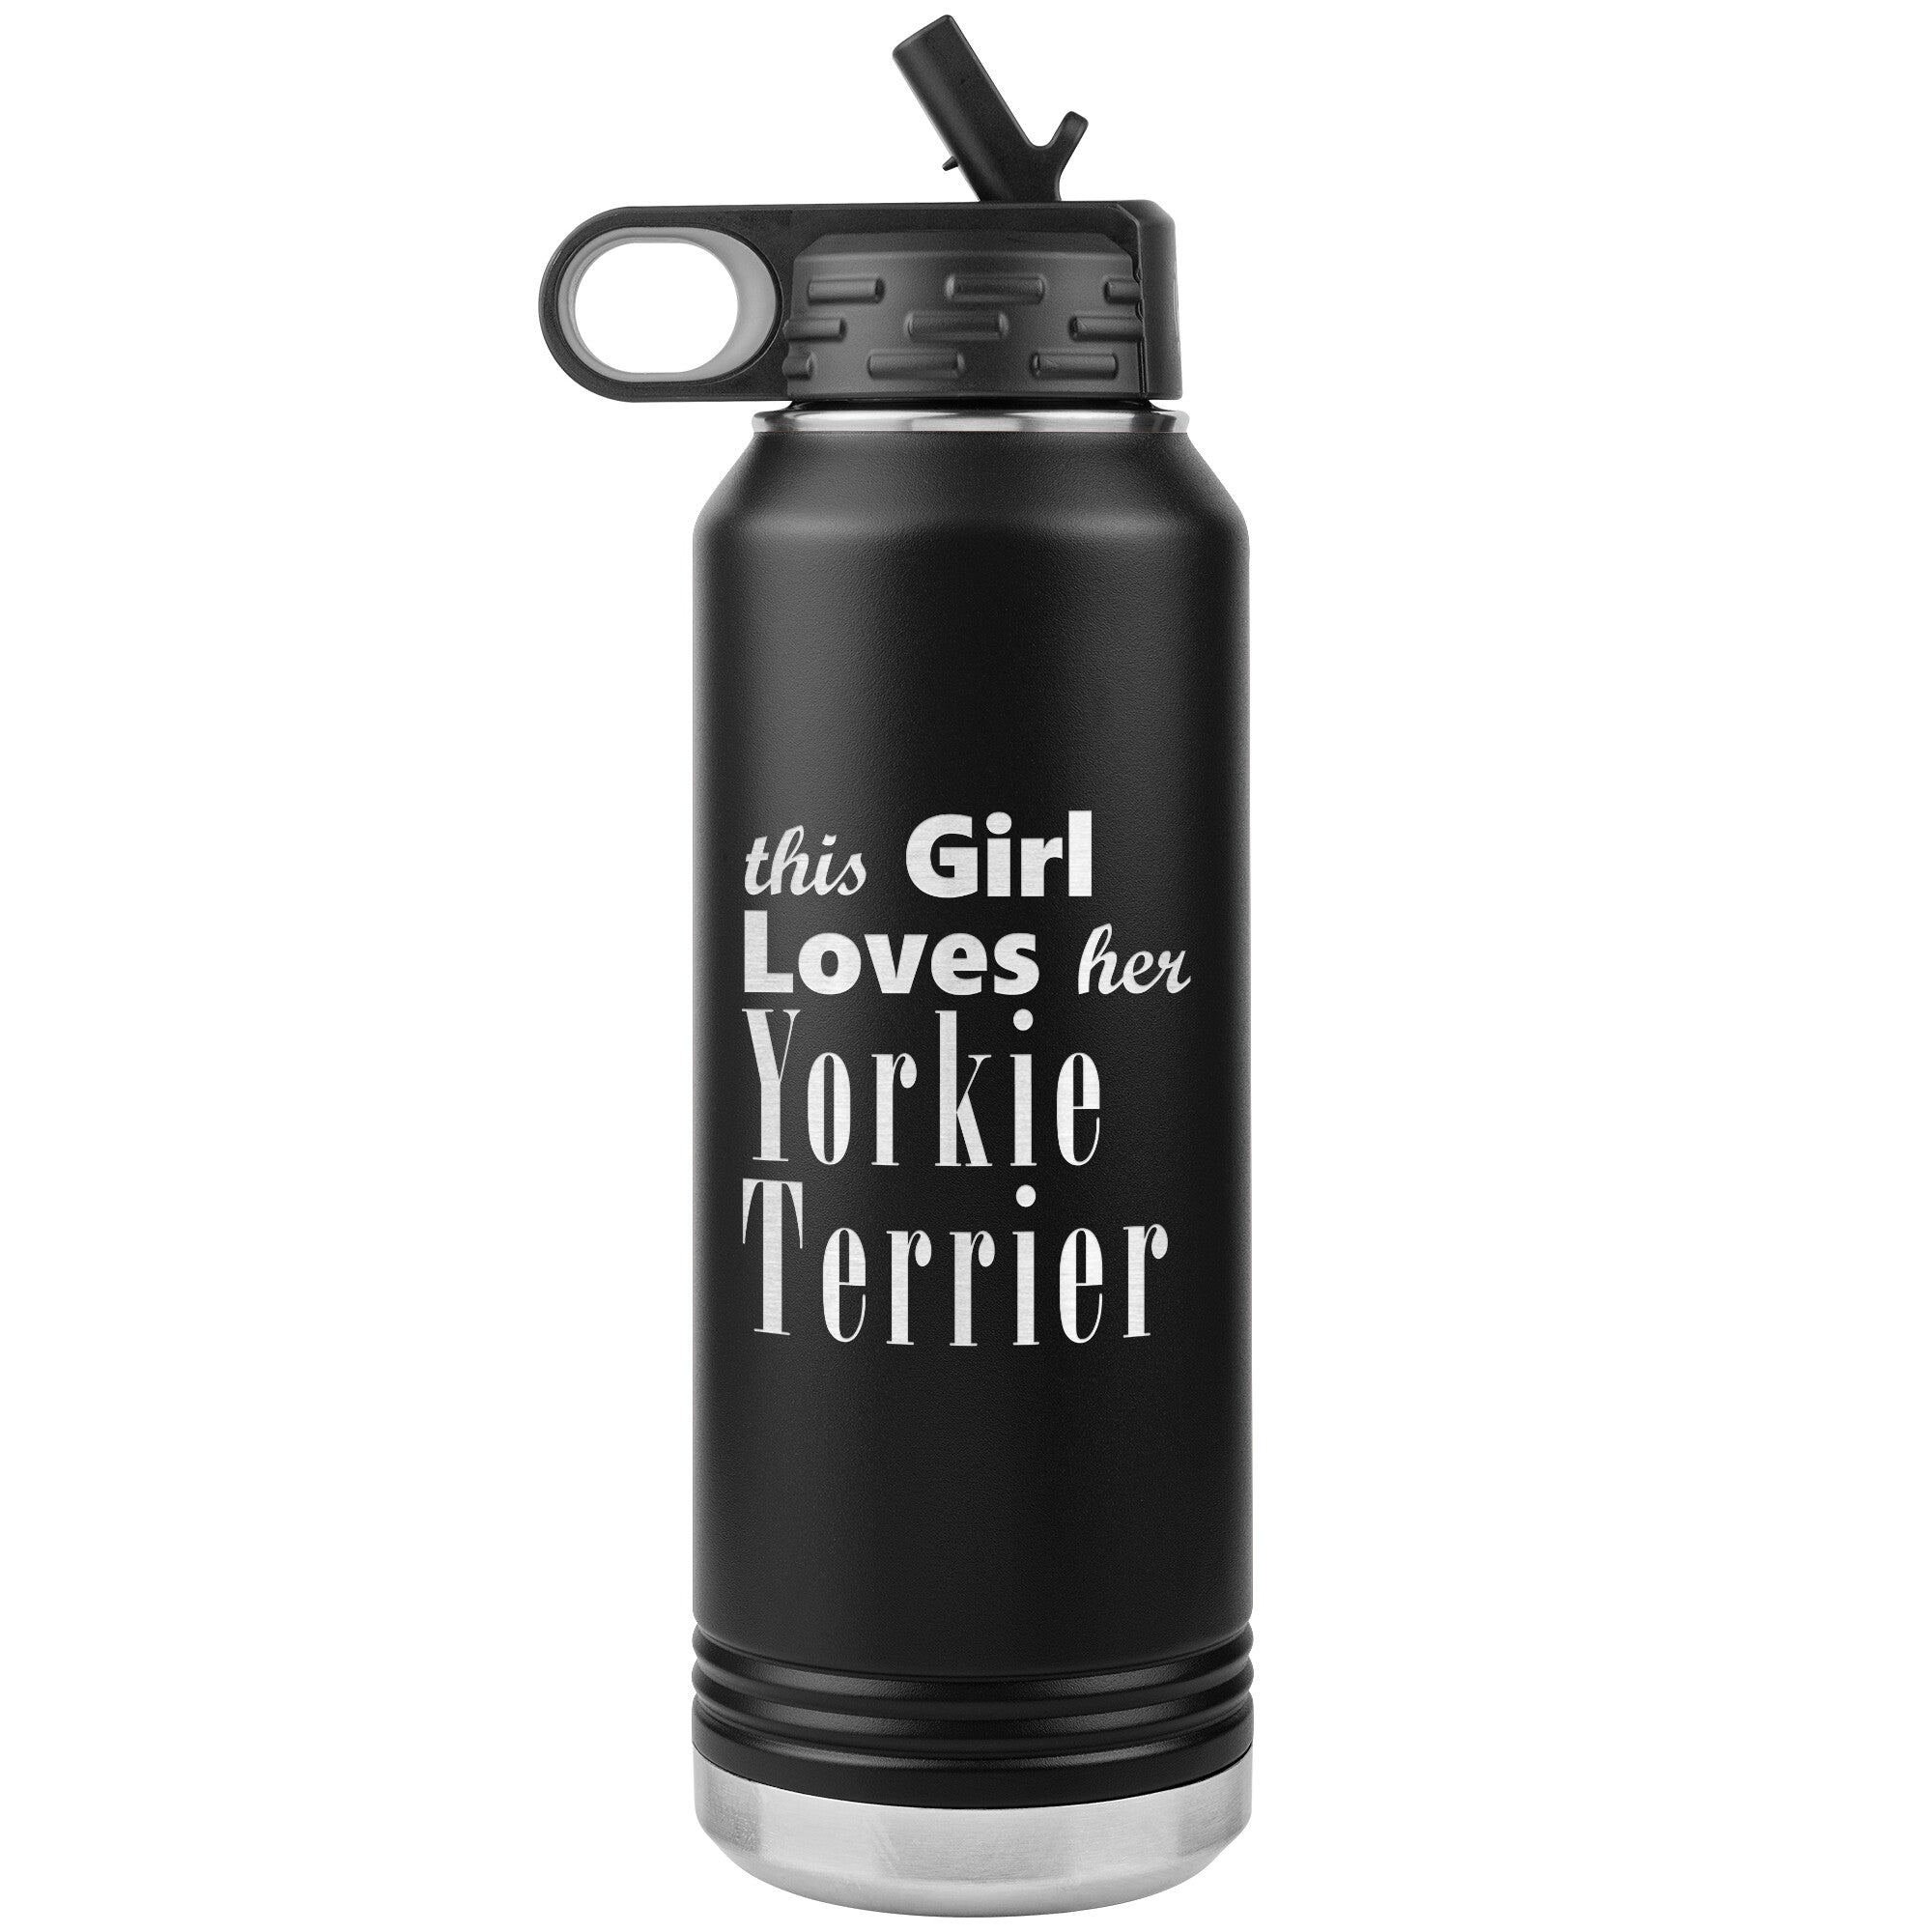 Yorkie Terrier - 32oz Insulated Water Bottle